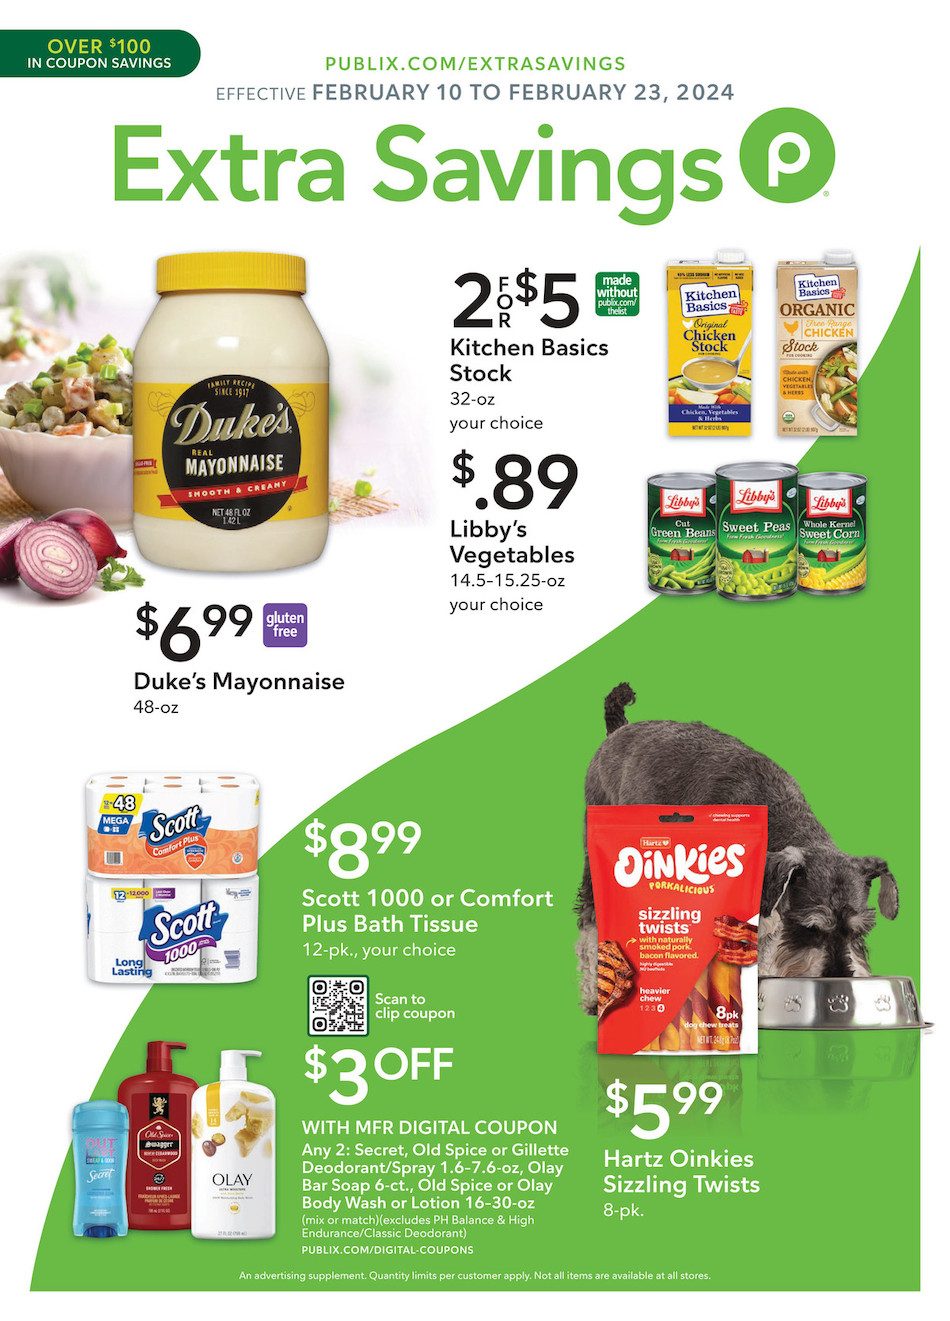 Publix Ad Extra Savings 10th – 23rd February 2024 Page 1